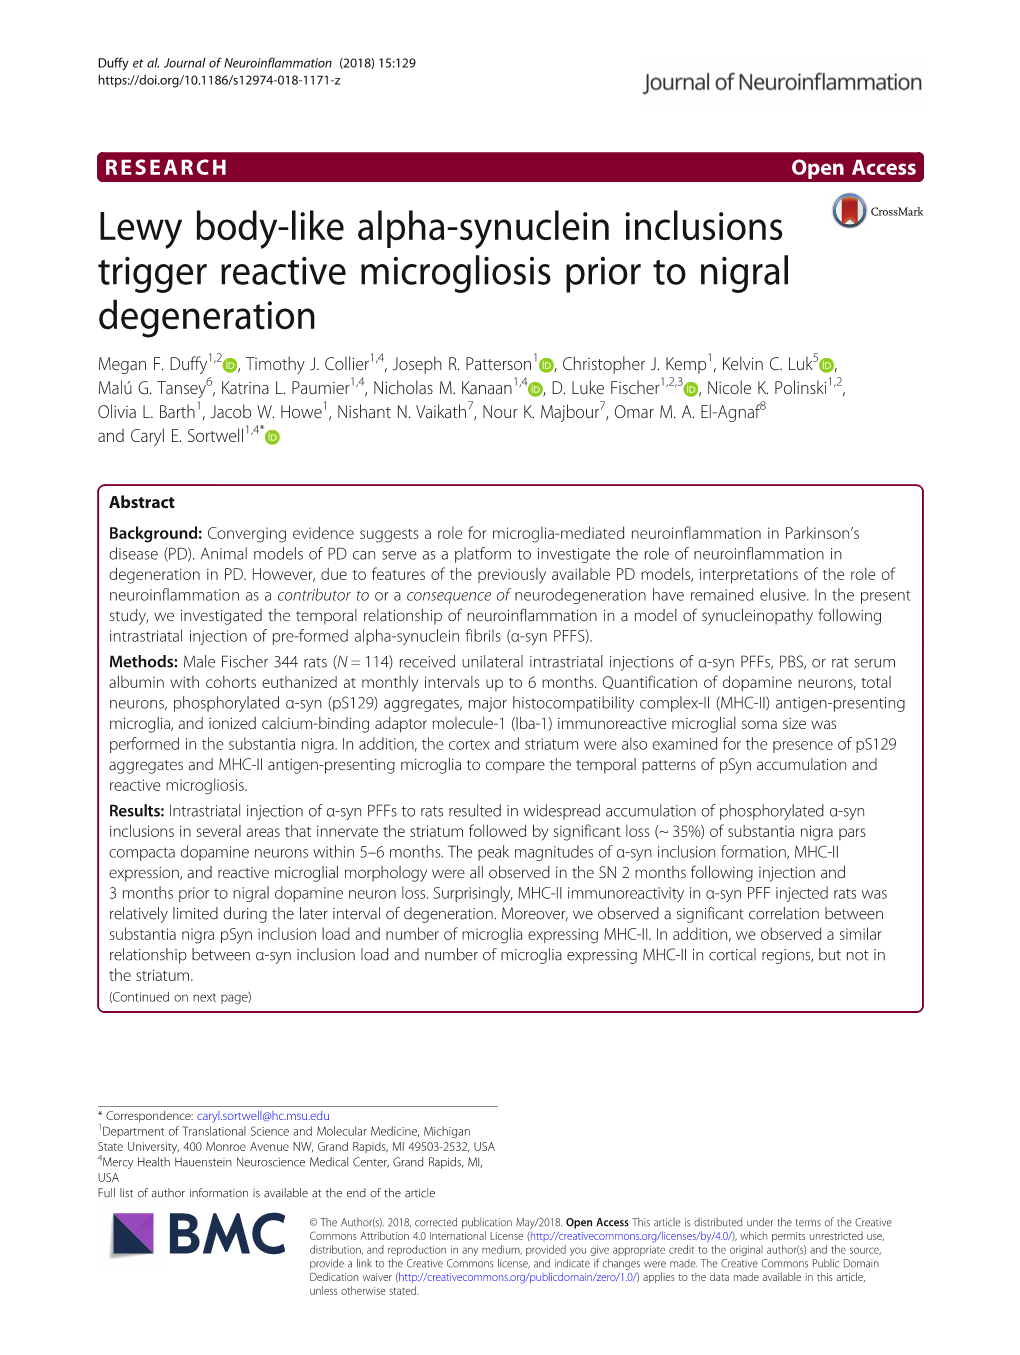 Lewy Body-Like Alpha-Synuclein Inclusions Trigger Reactive Microgliosis Prior to Nigral Degeneration Megan F